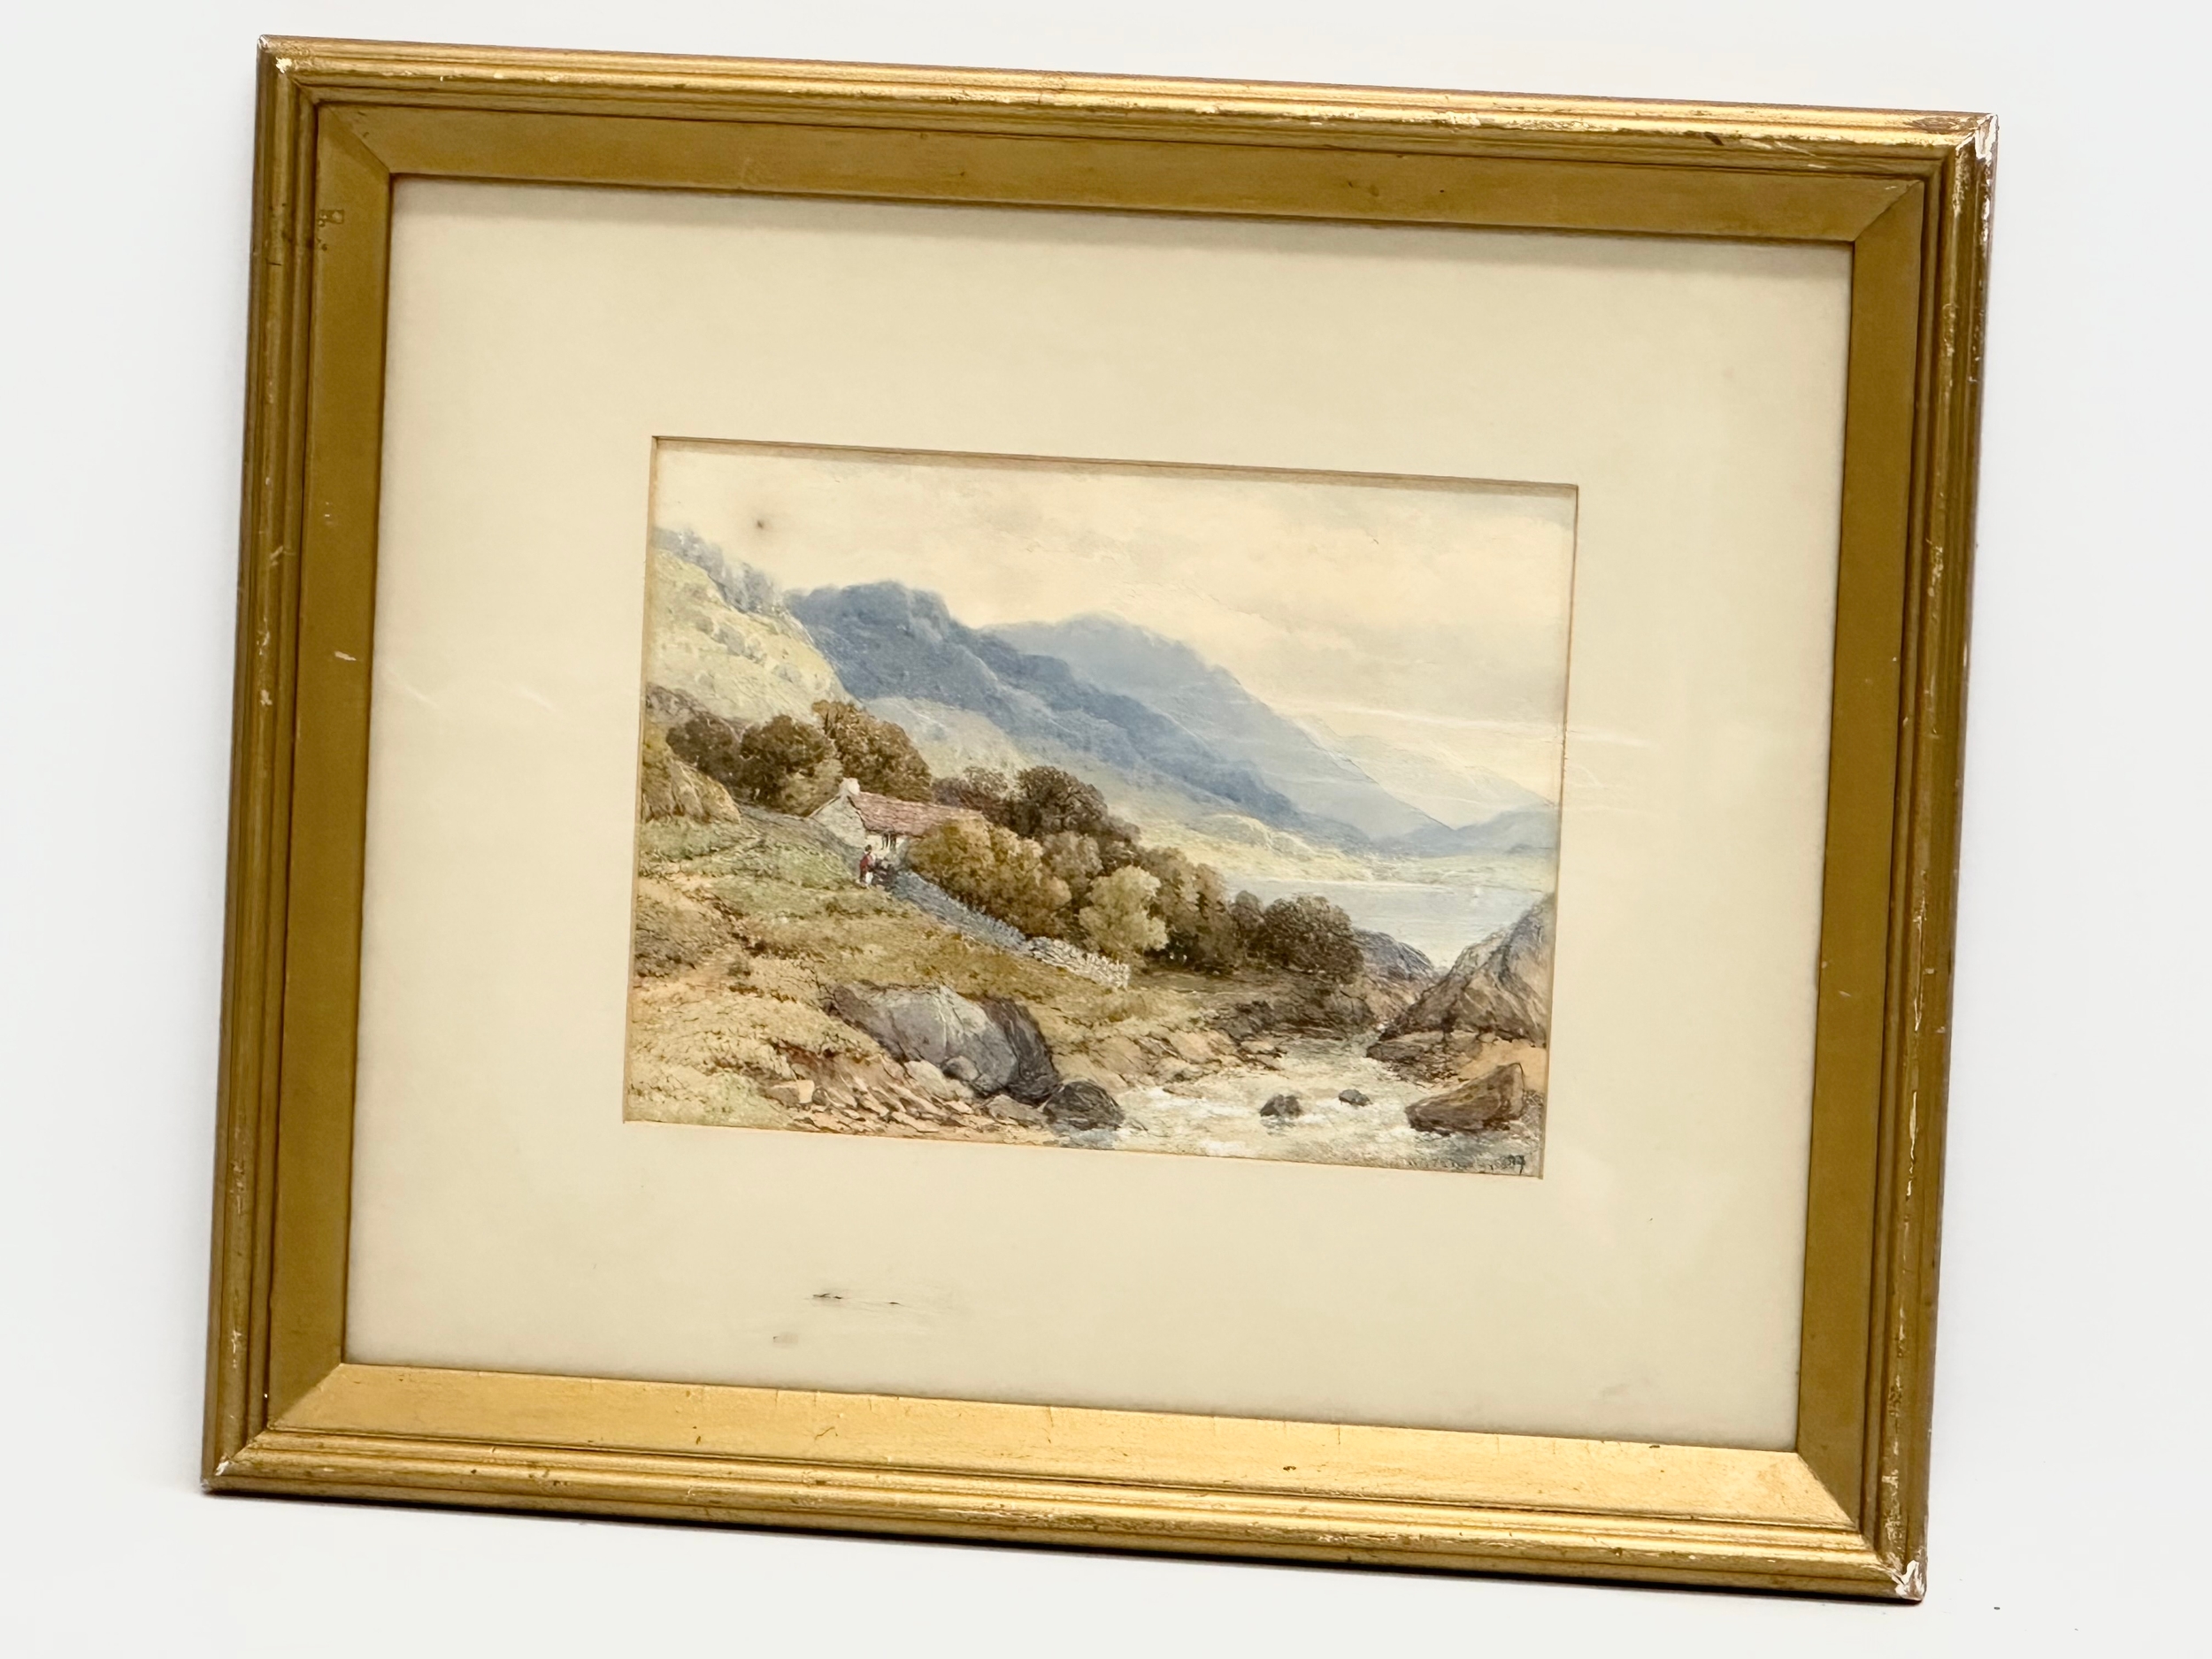 A watercolour drawing by Edwin Aaron Penley (1826-1893) dated 1889. In original gilt frame. 19.